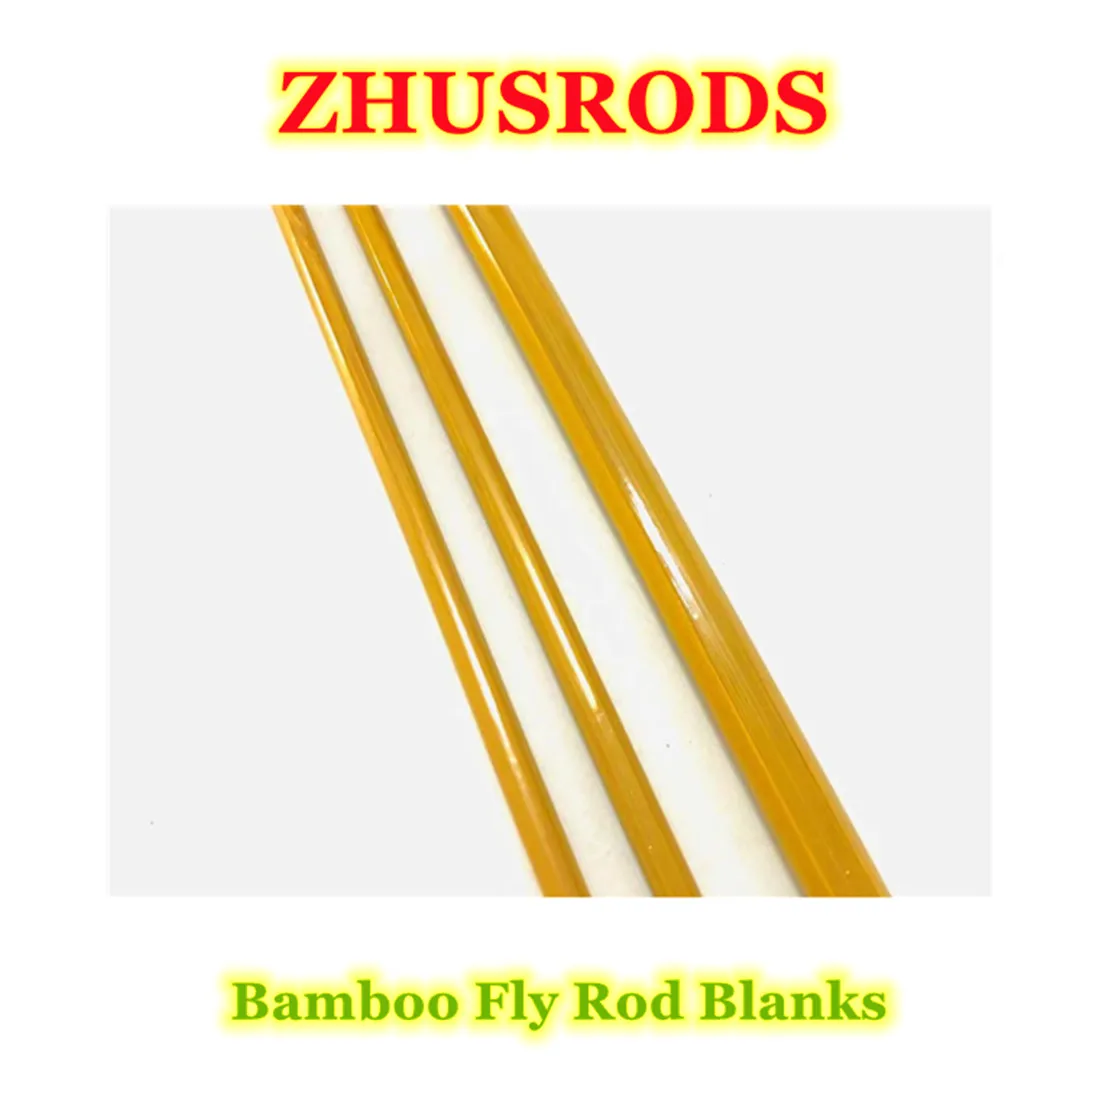 

7 FT - 3 WT / 2-Sections / ZHUSRODS Bamboo Fly Rod Blanks / Fly Fishing Rods & Canes / Rod Building & Repair / Vintage